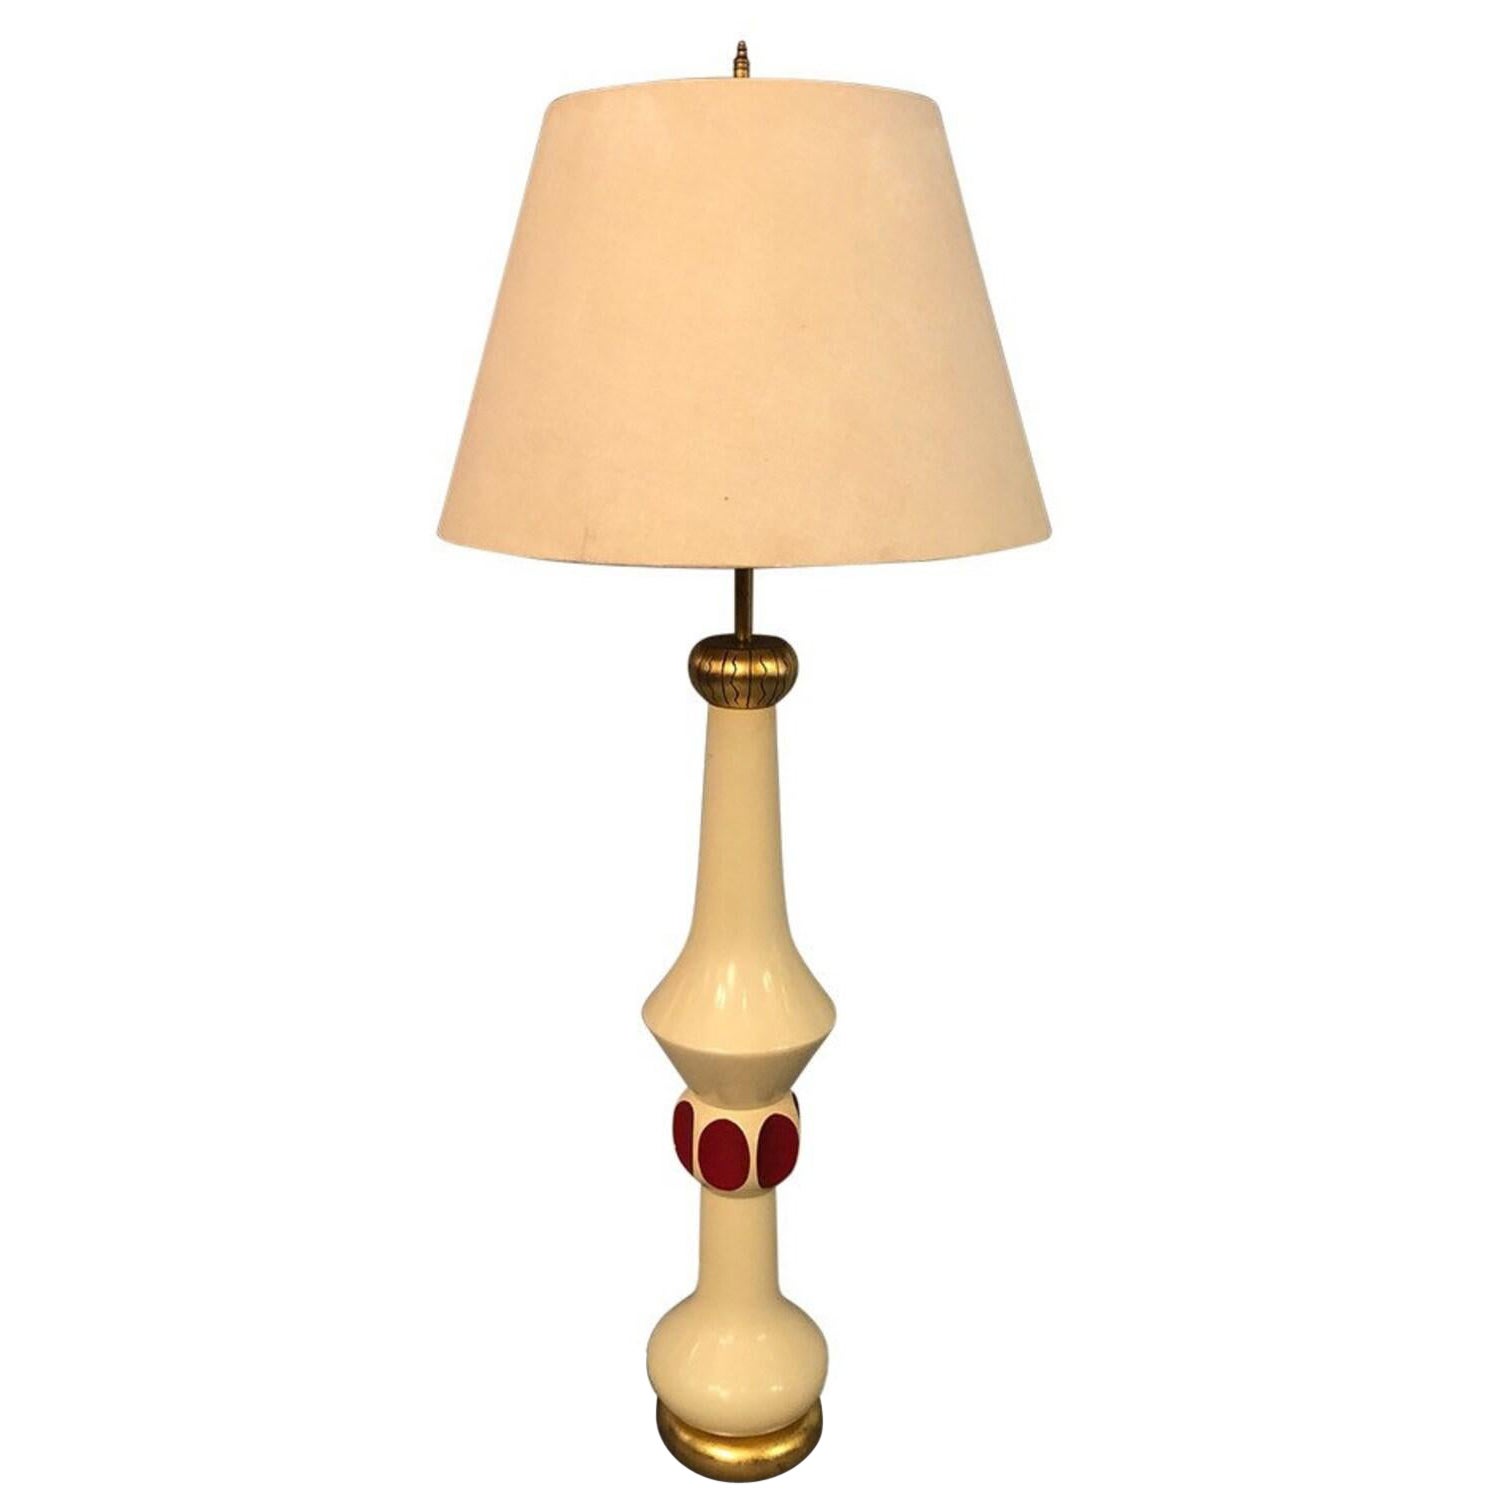 Vintage Mid-Century Modern 70's White Ceramic and Walnut Wood Table Lamp  For Sale at 1stDibs